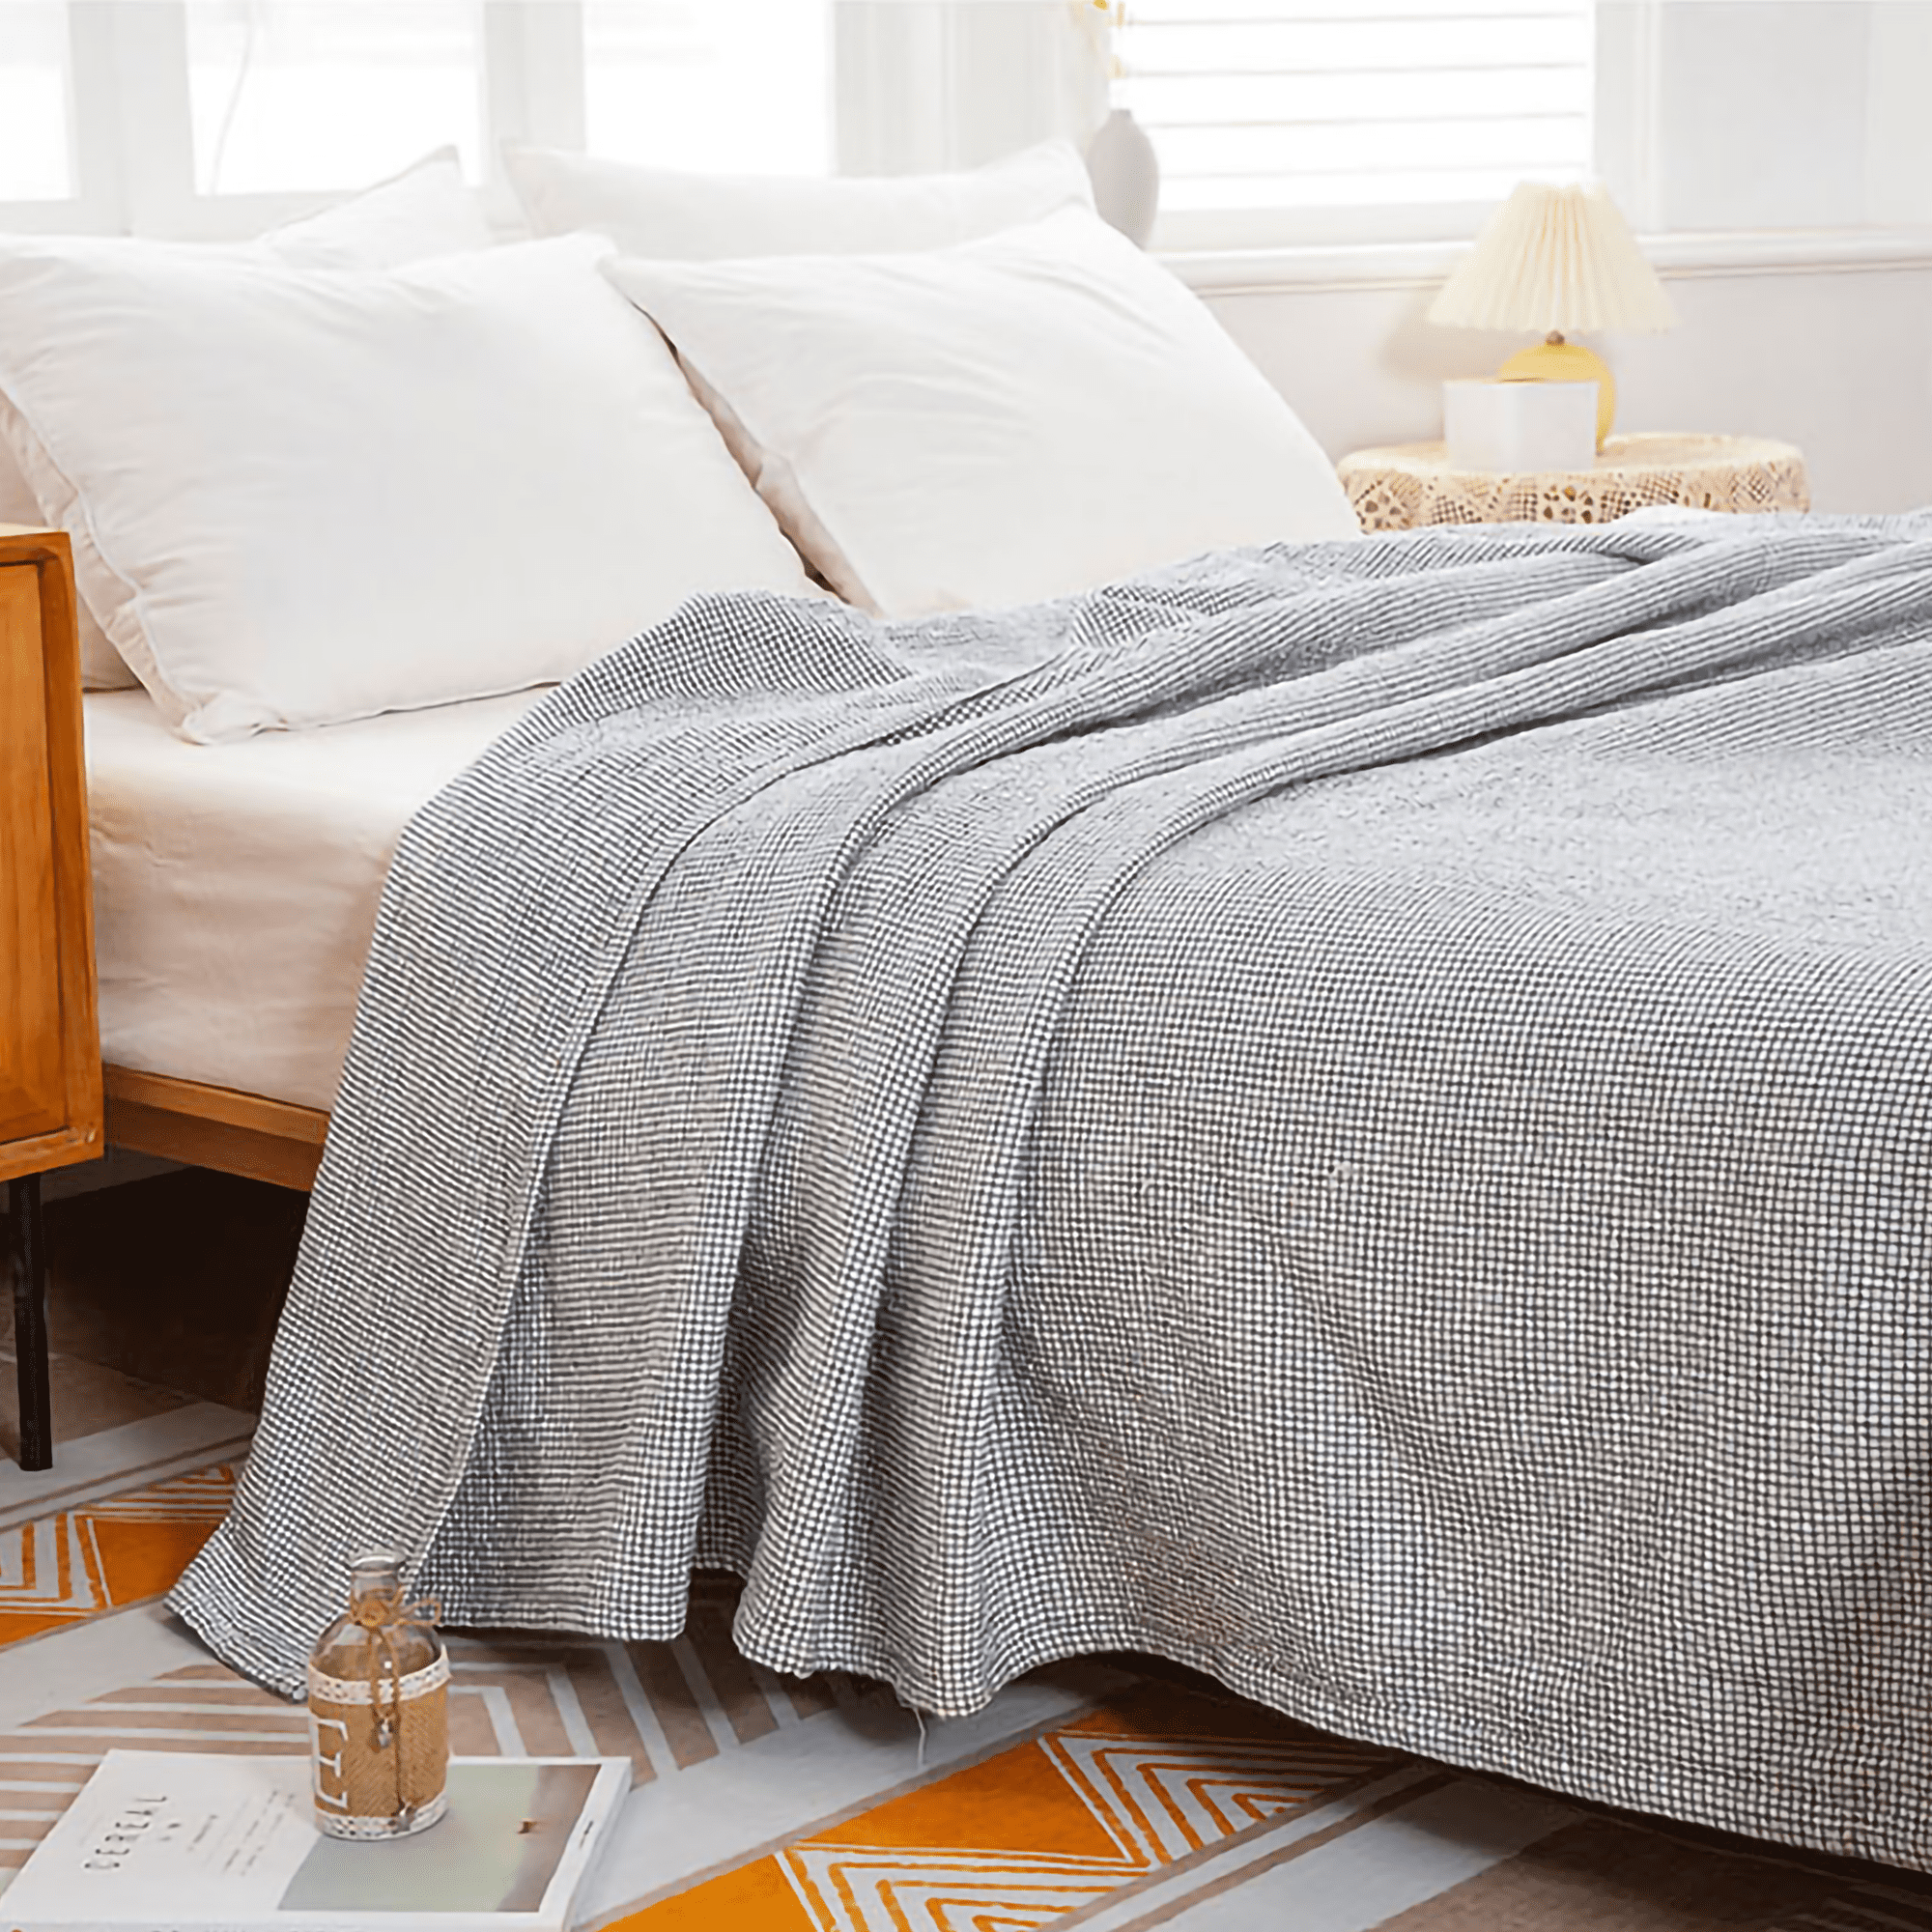 Cotton Blanket / Bed Throw - Silver